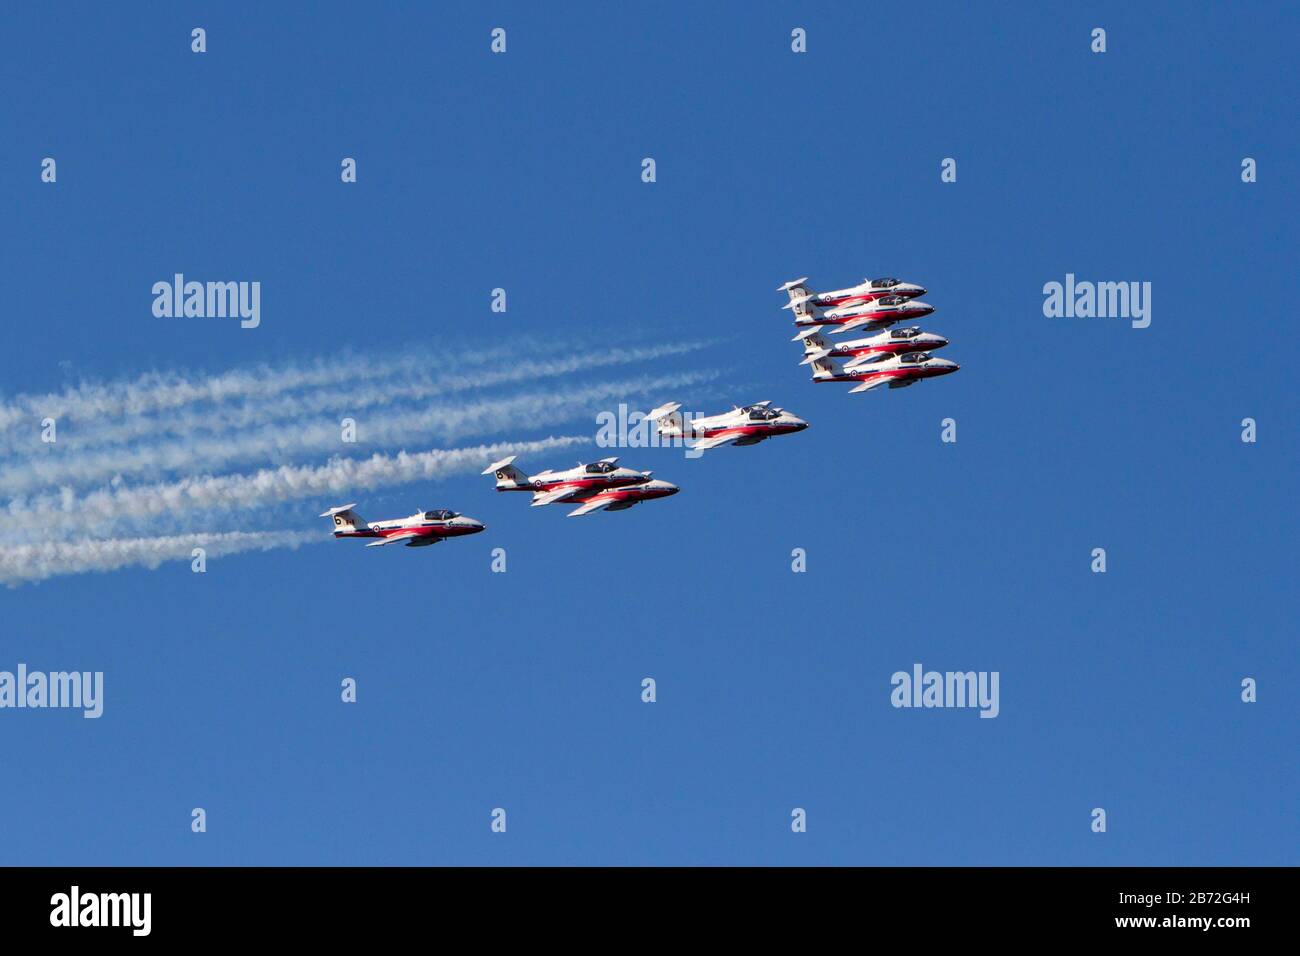 The Snowbirds, 431 Air Demonstration Squadron aerobatics flight demonstration team of the Royal Canadian Air Force performing In Nanaimo, BC, Canada Stock Photo